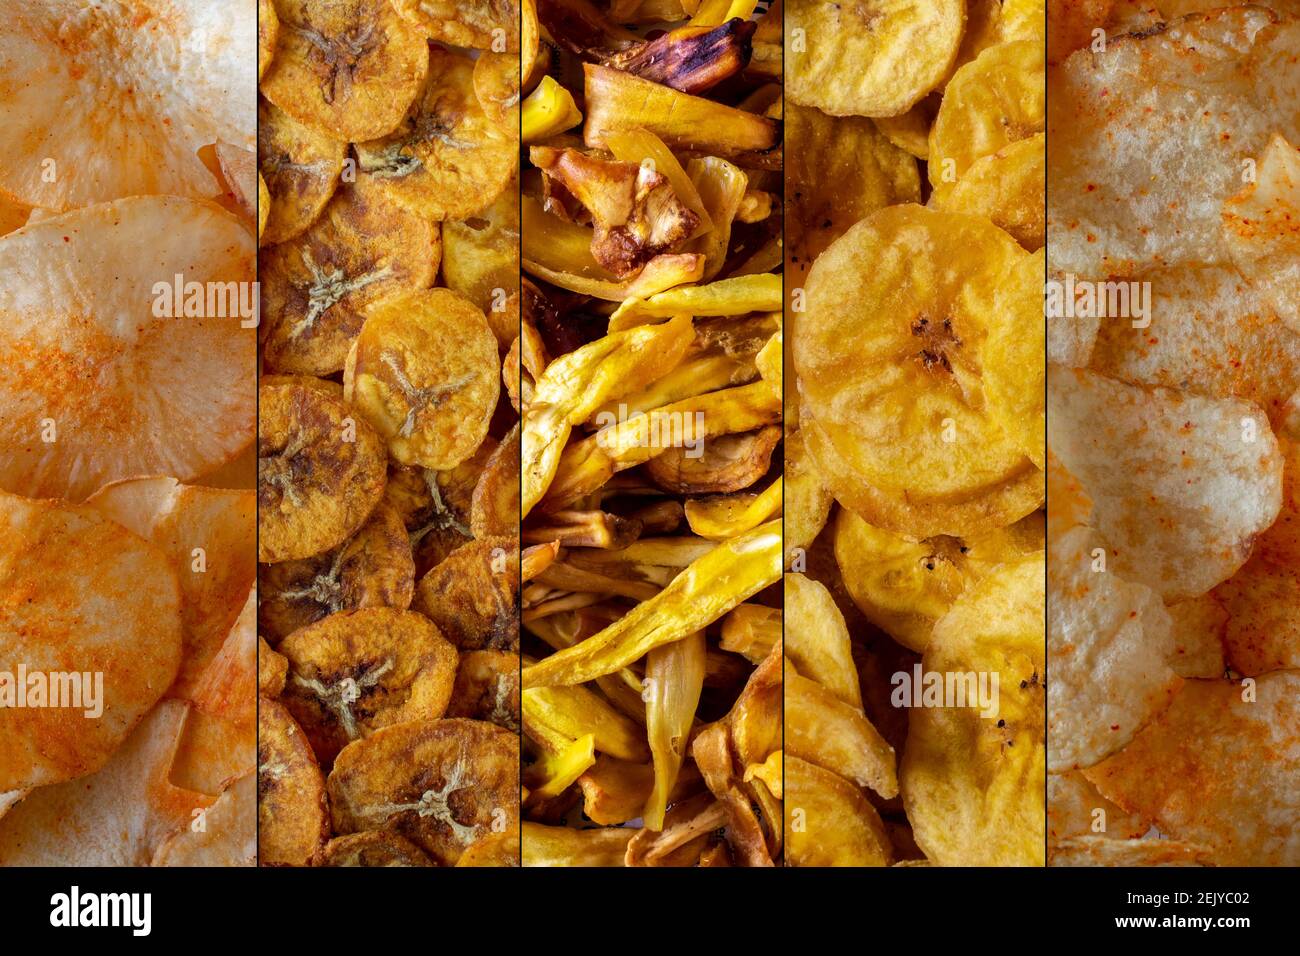 Variety chips of potato, banana, jackfruit and cassava. Kinds of common chips both sweet and tangy Stock Photo